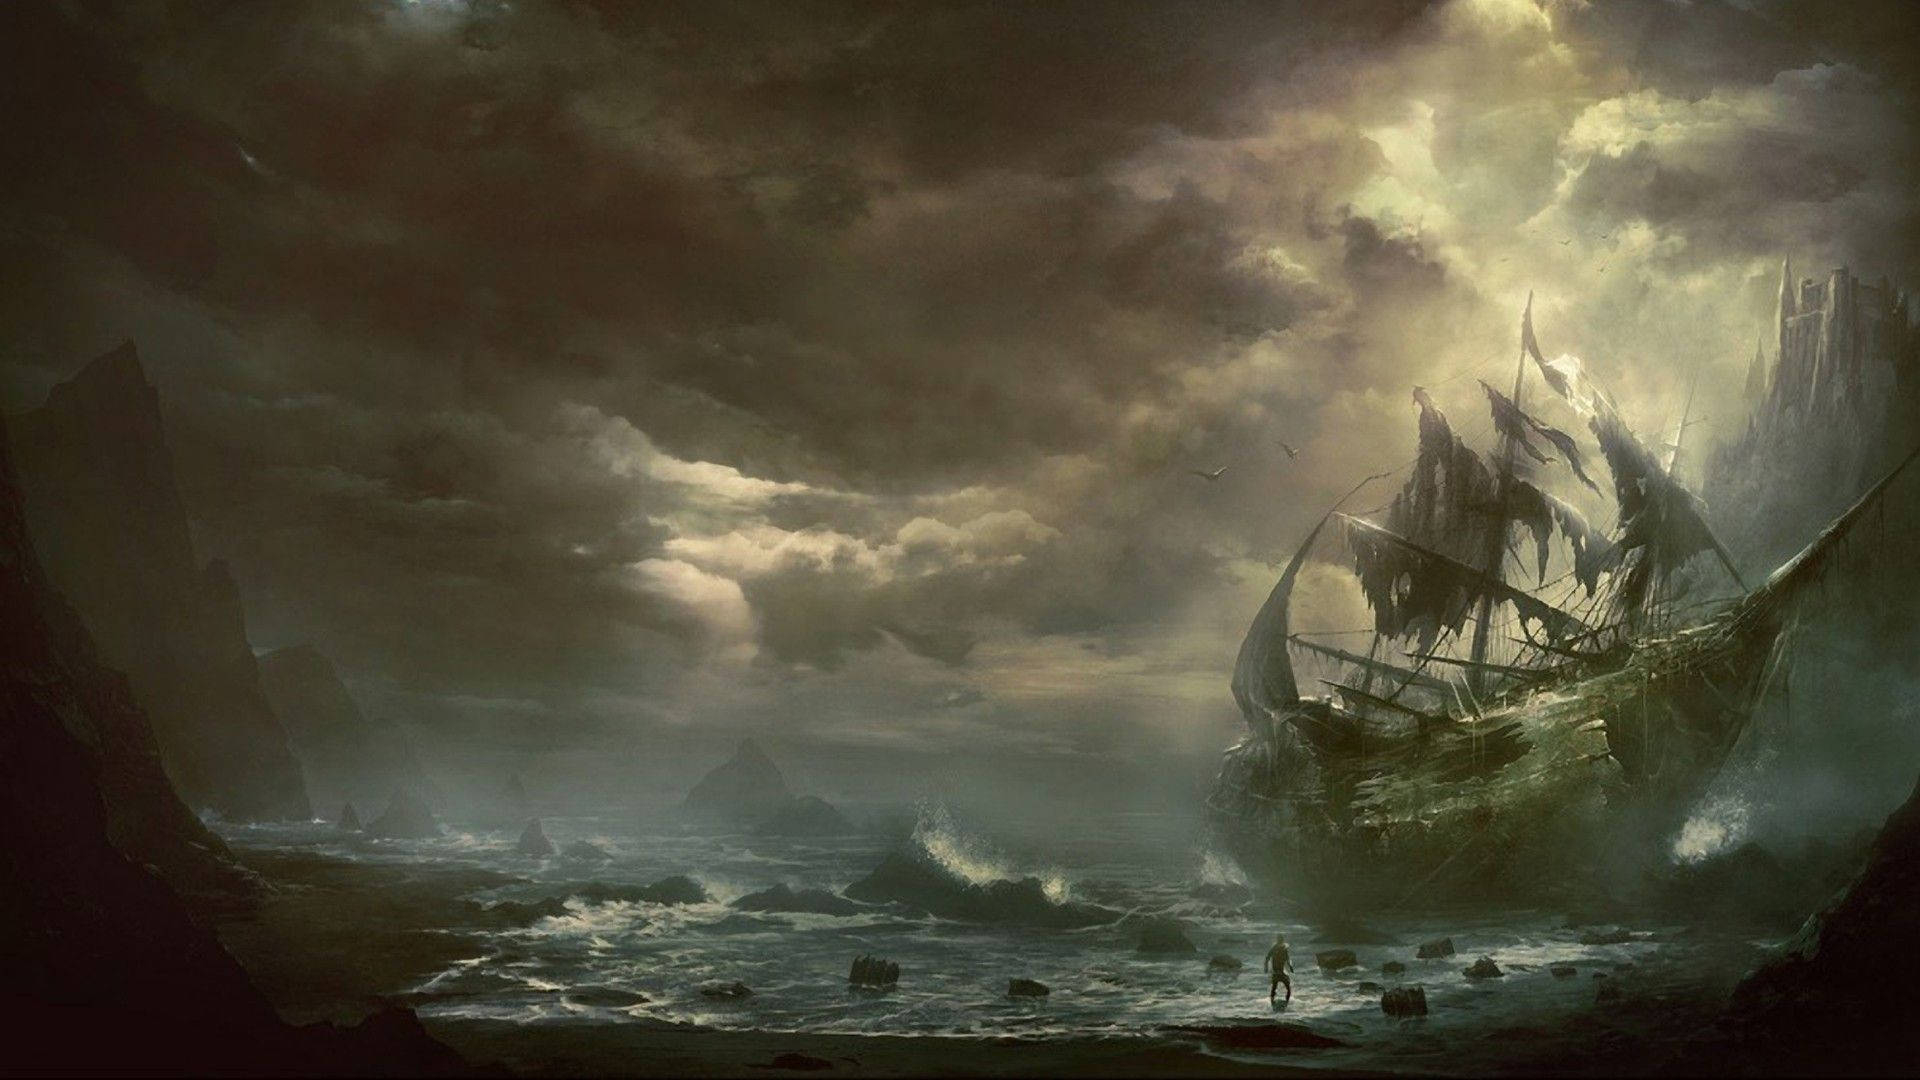 1920x1080 Download Aesthetic Abandoned Pirate Ship Wallpaper